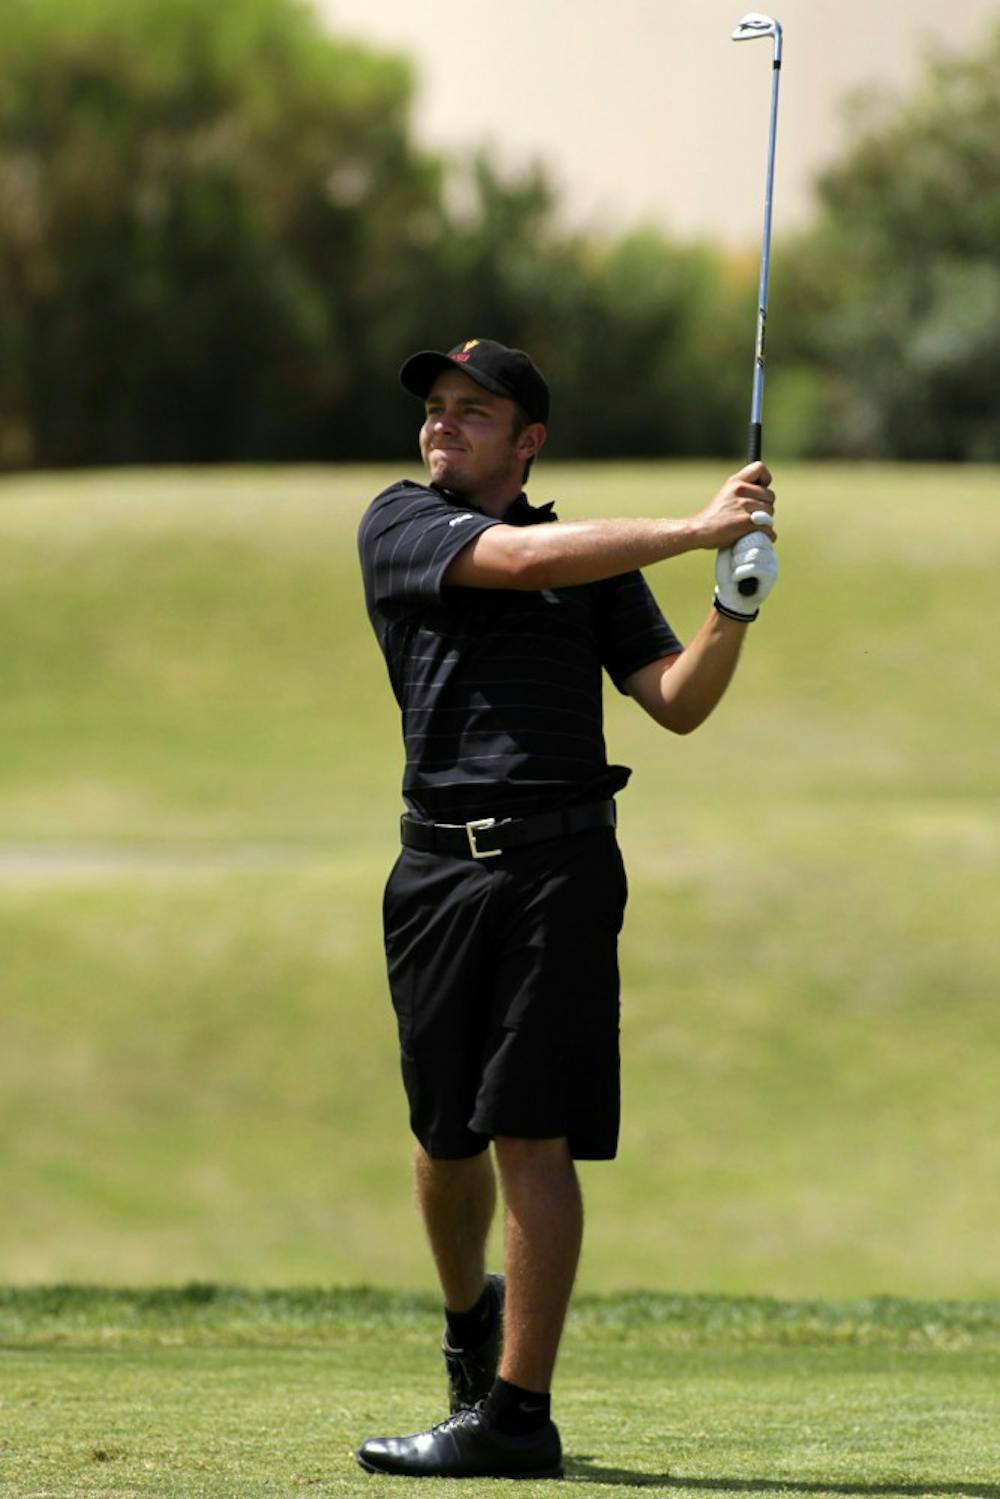 Austin Quick tees off at the ASU Thunderbird Invitational. Quick was one of the bright spots in an otherwise disappointing season for the ASU men’s golf team. (Photo by Sam Rosenbaum)